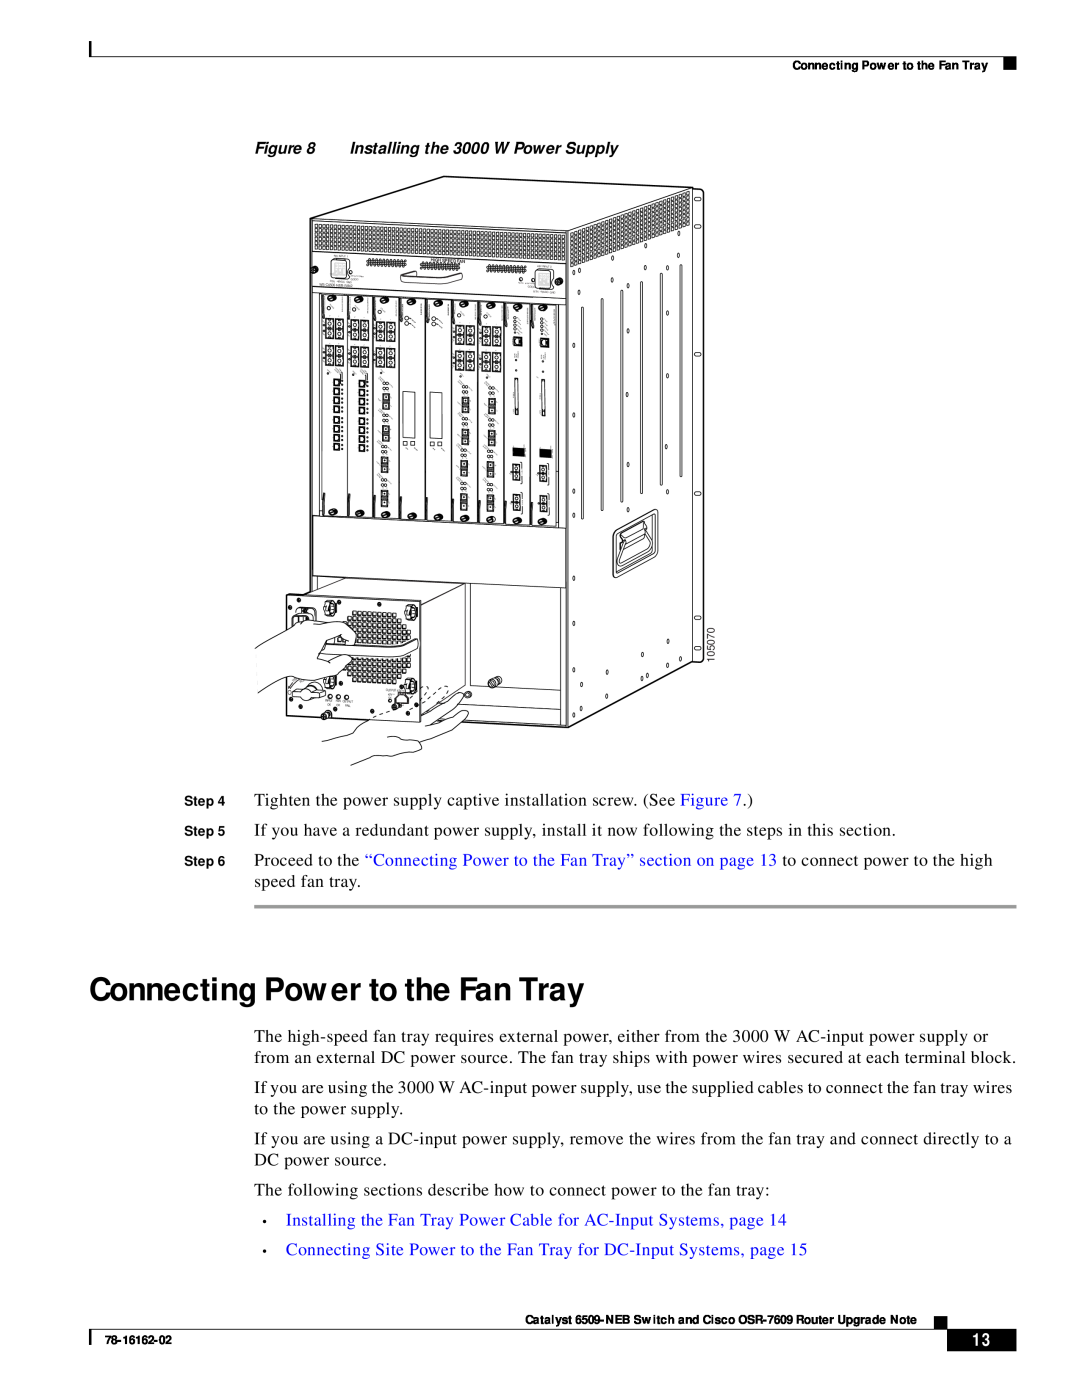 Cisco Systems OSR-7609 Connecting Power to the Fan Tray, Installing the Fan Tray Power Cable for AC-Input Systems, page 